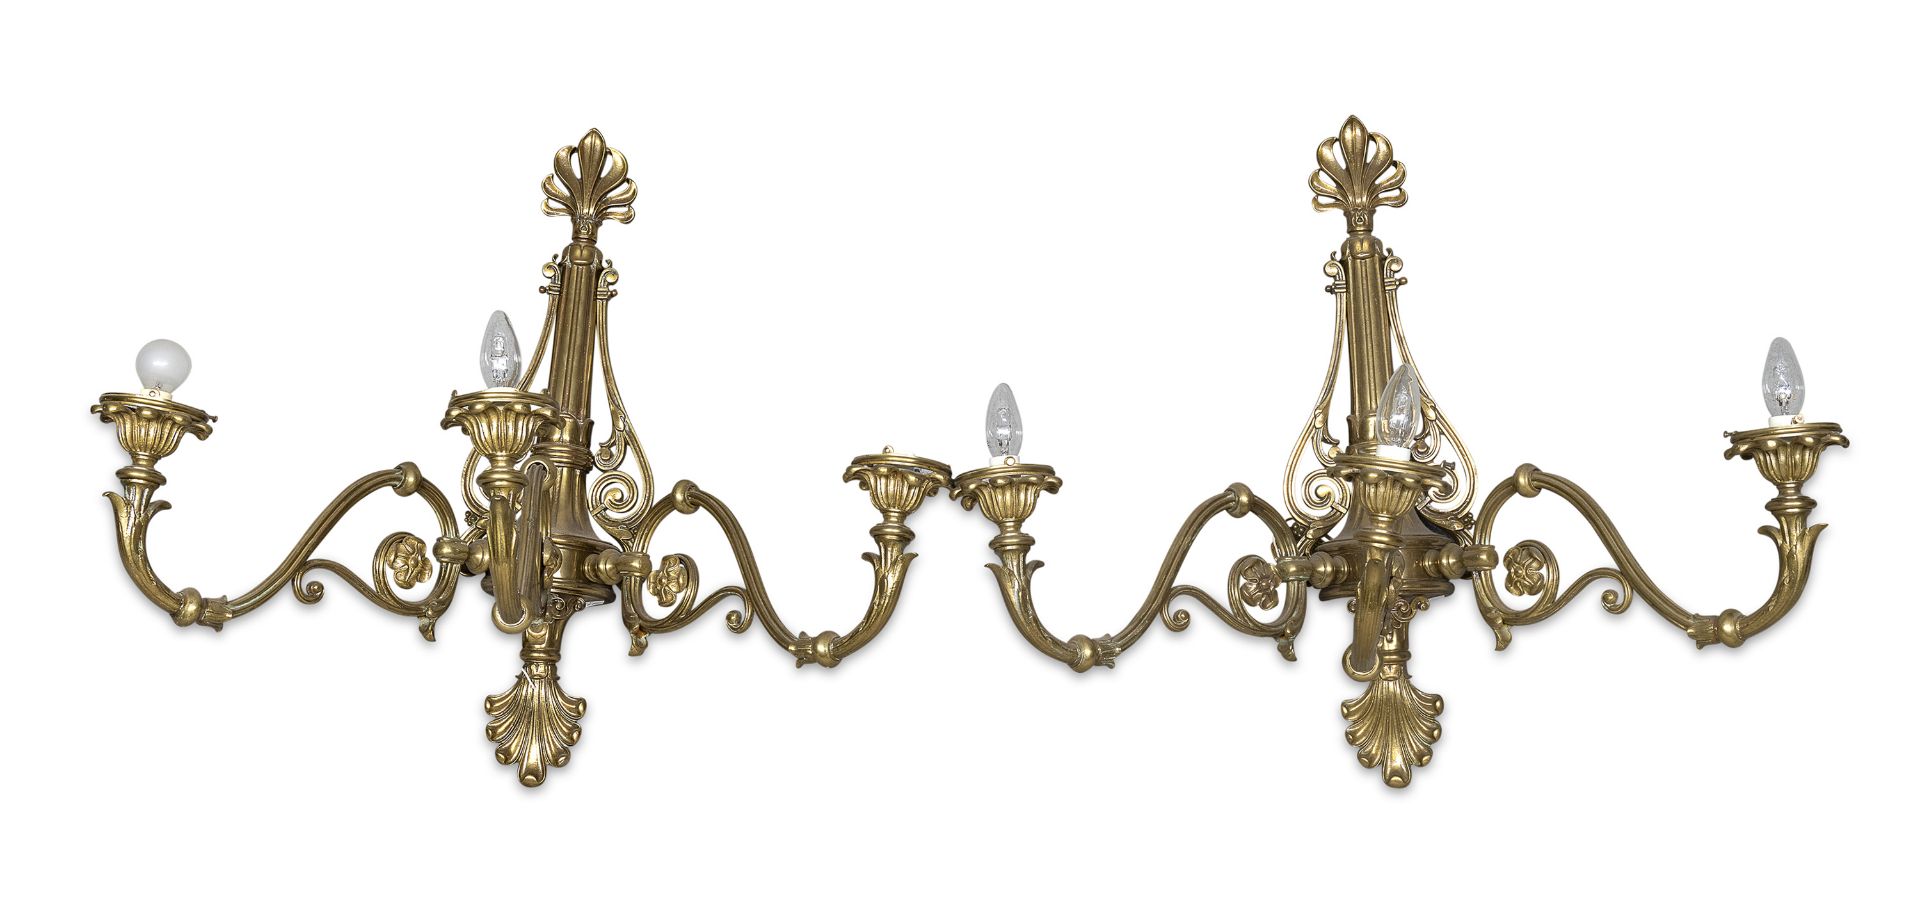 BEAUTIFUL PAIR OF GILT BRONZE WALL LAMPS END OF THE 19TH CENTURY